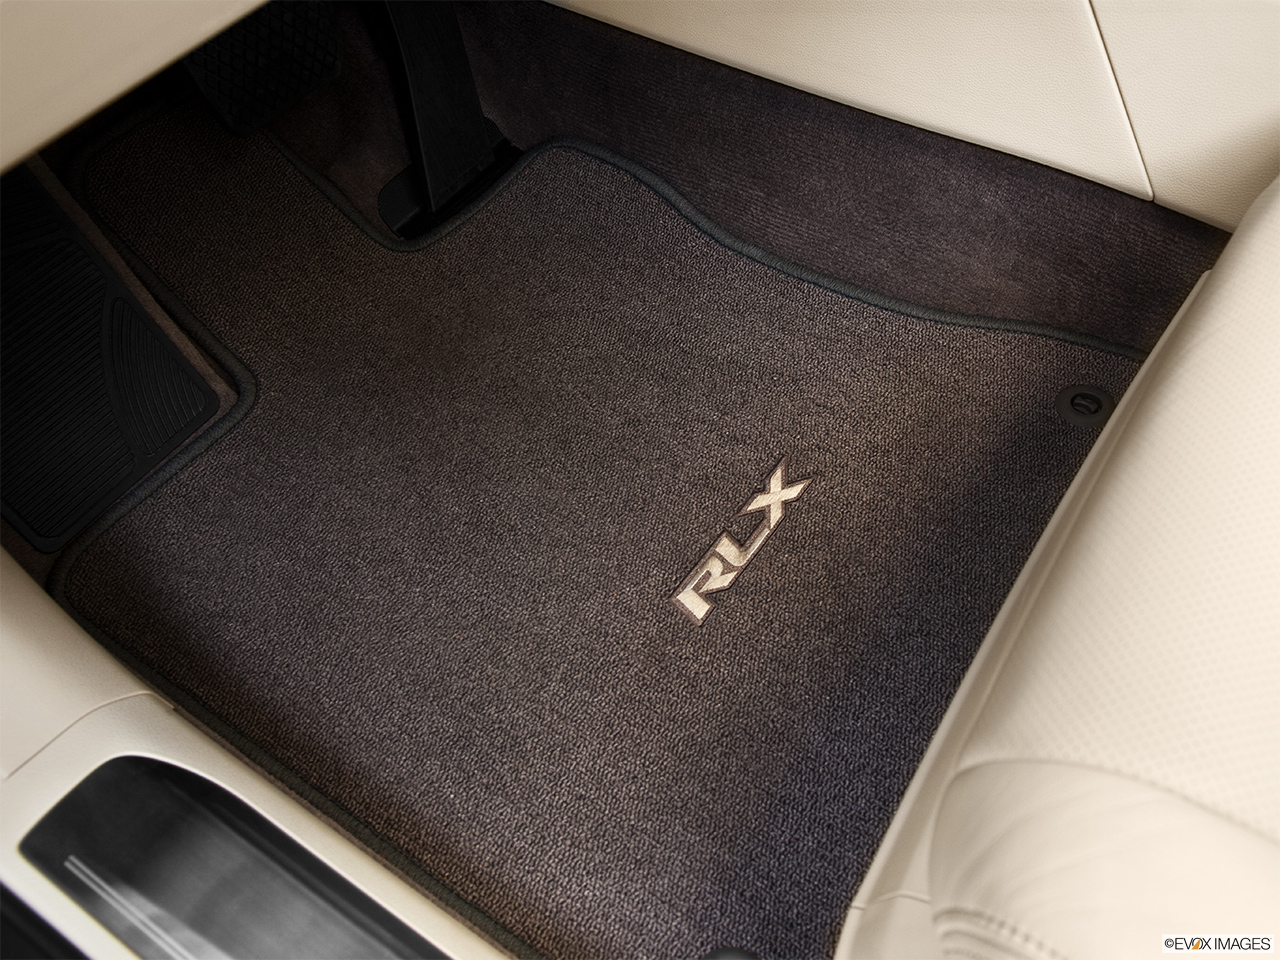 2014 Acura RLX Base Driver's floor mat and pedals. Mid-seat level from outside looking in. 